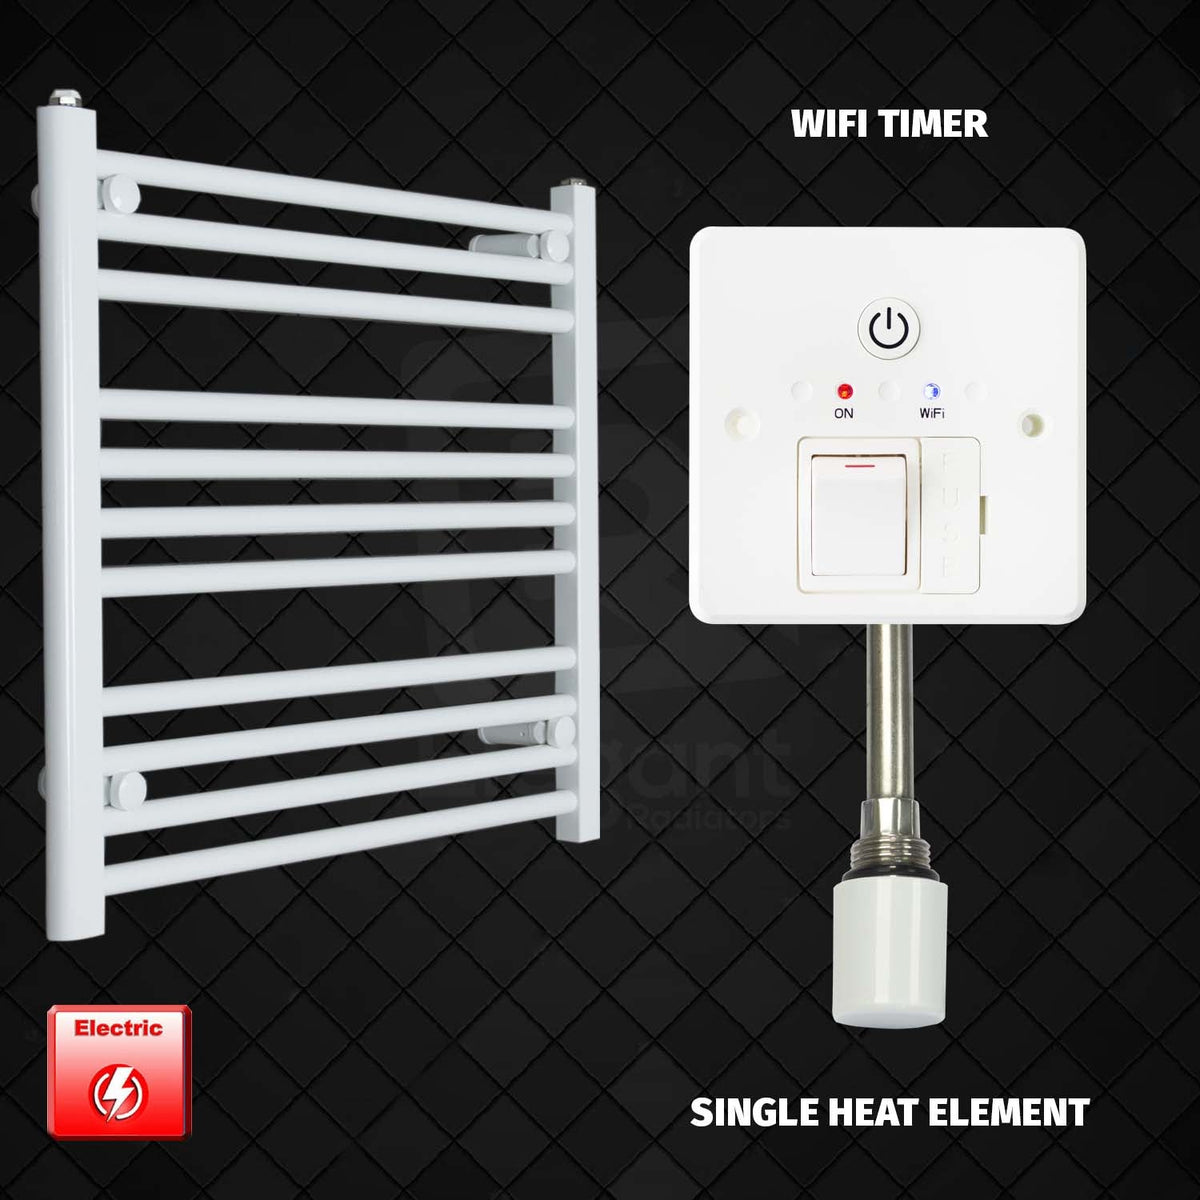 600 mm High 700 mm Wide Pre-Filled Electric Heated Towel Rail Radiator White HTR Wifi Timer Single Heat Element